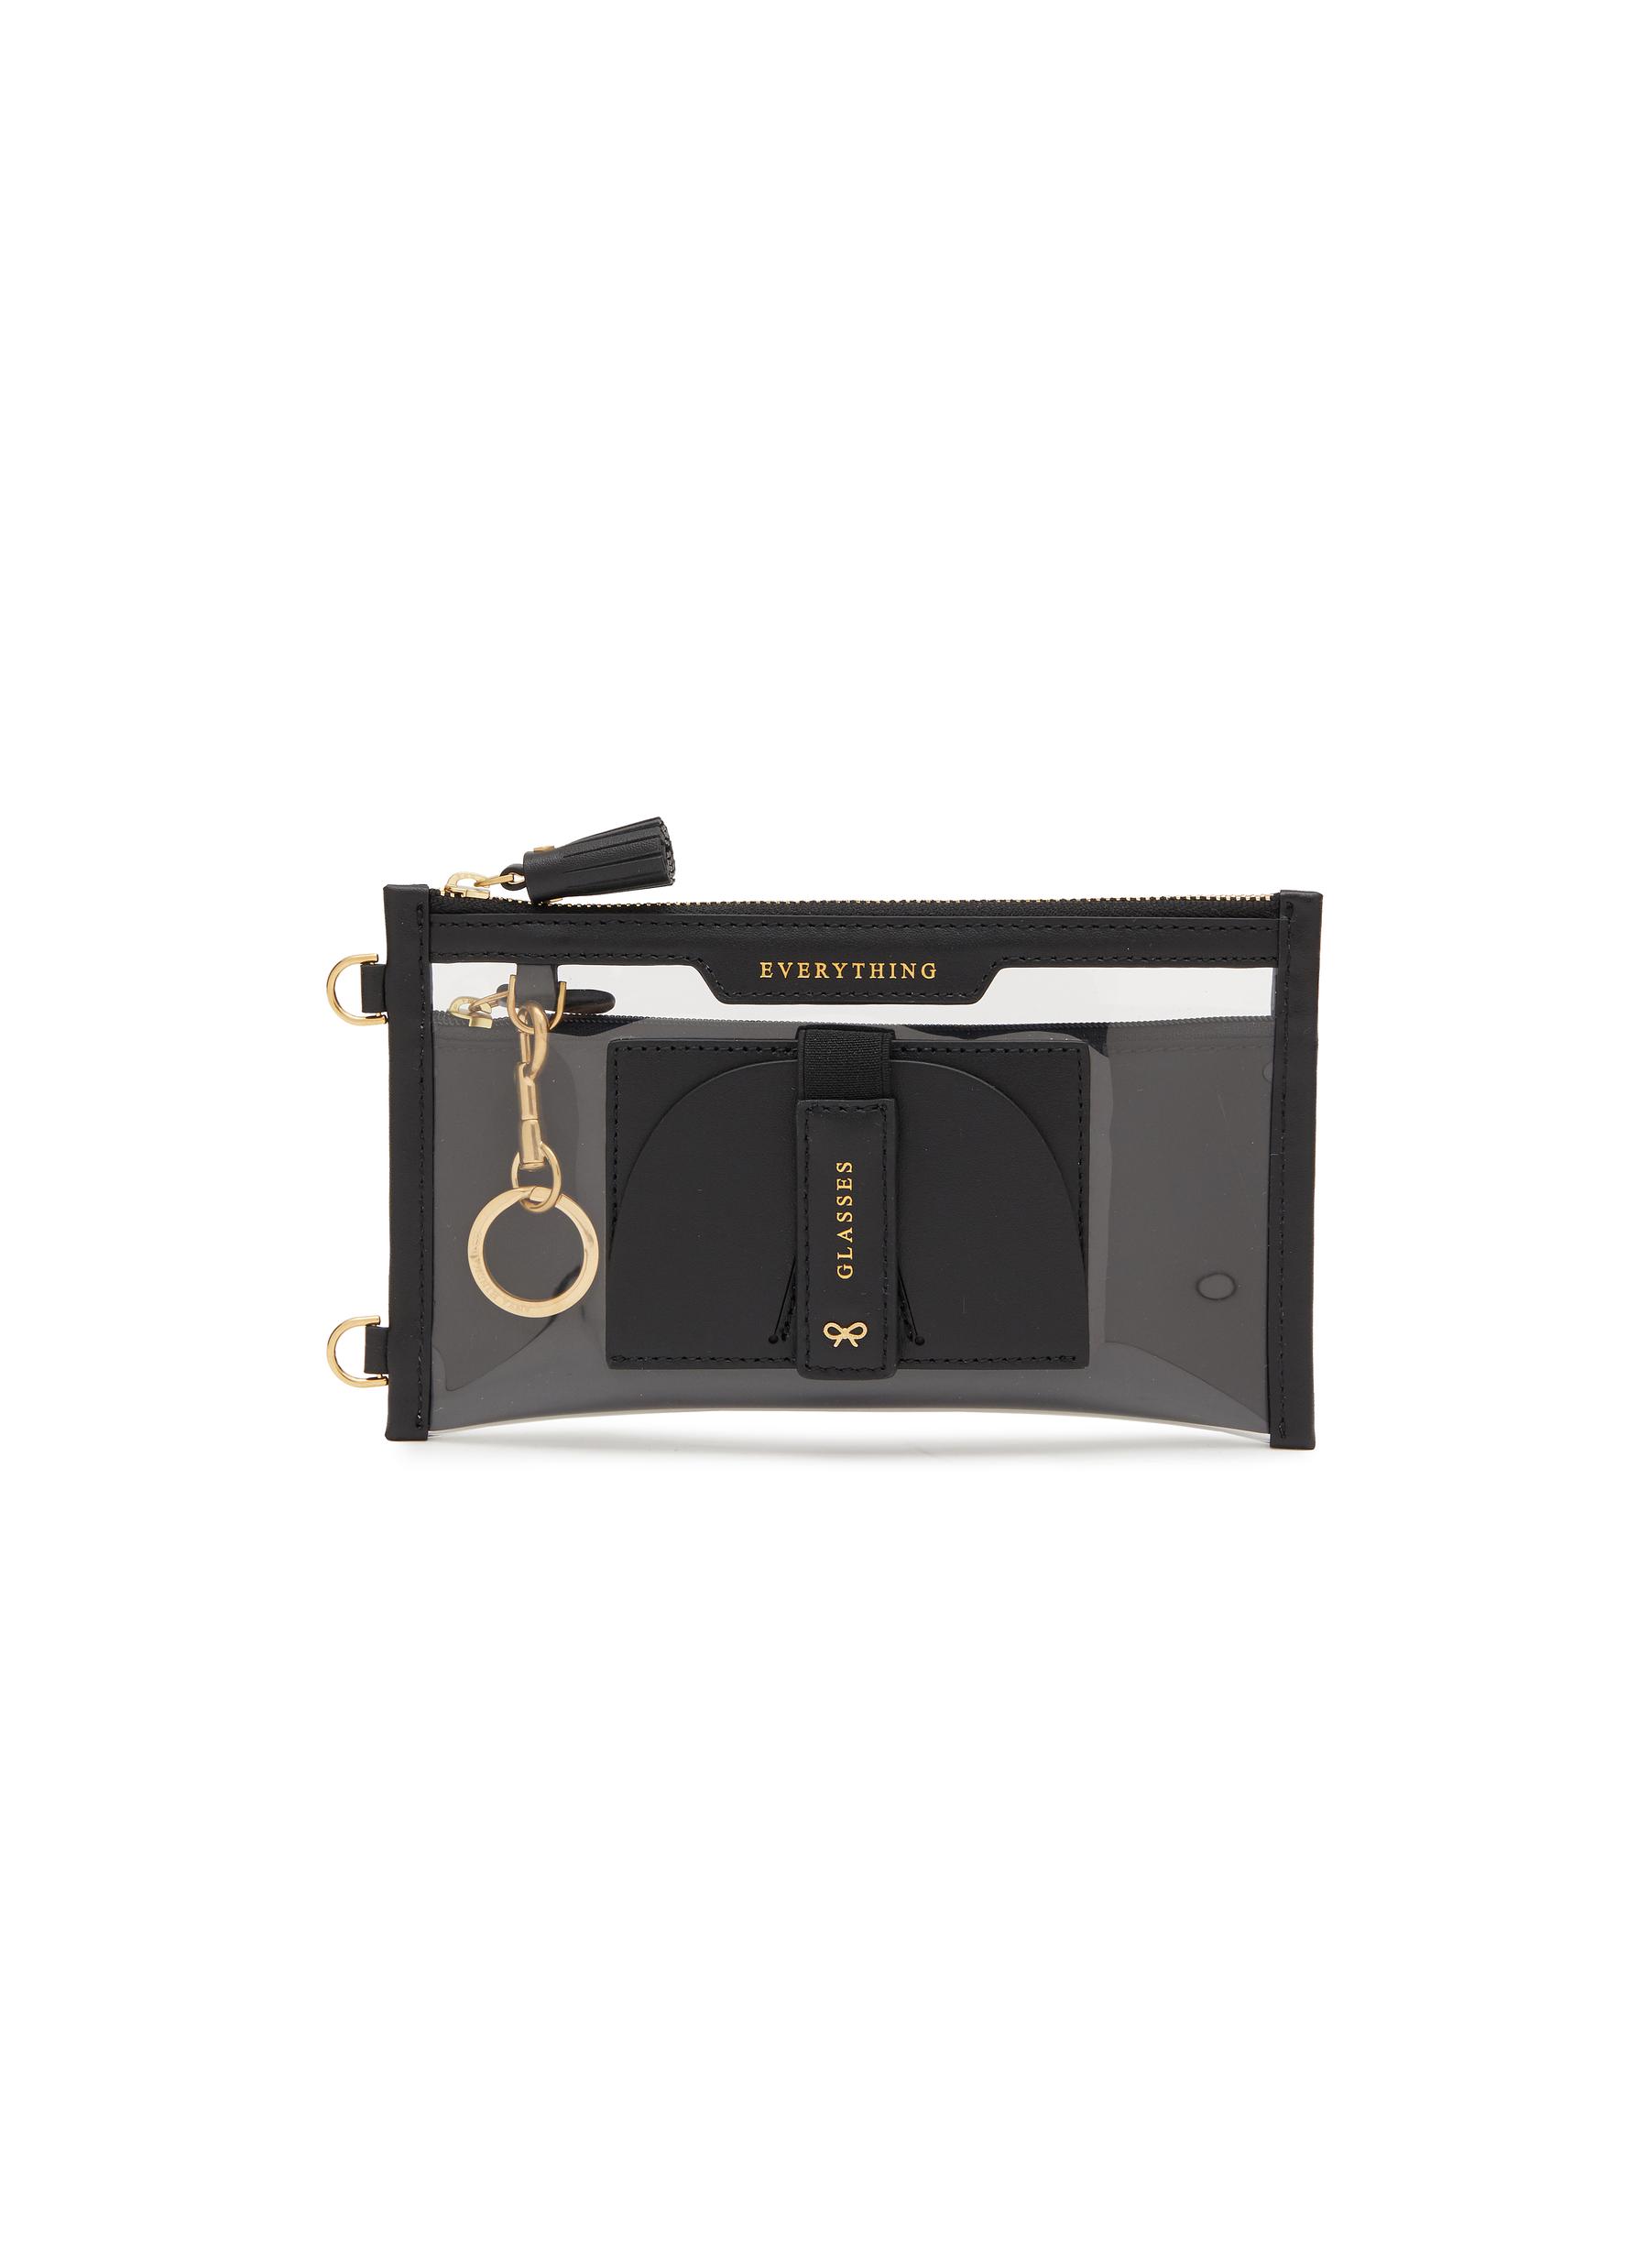 ANYA HINDMARCH EVERYTHING POUCH